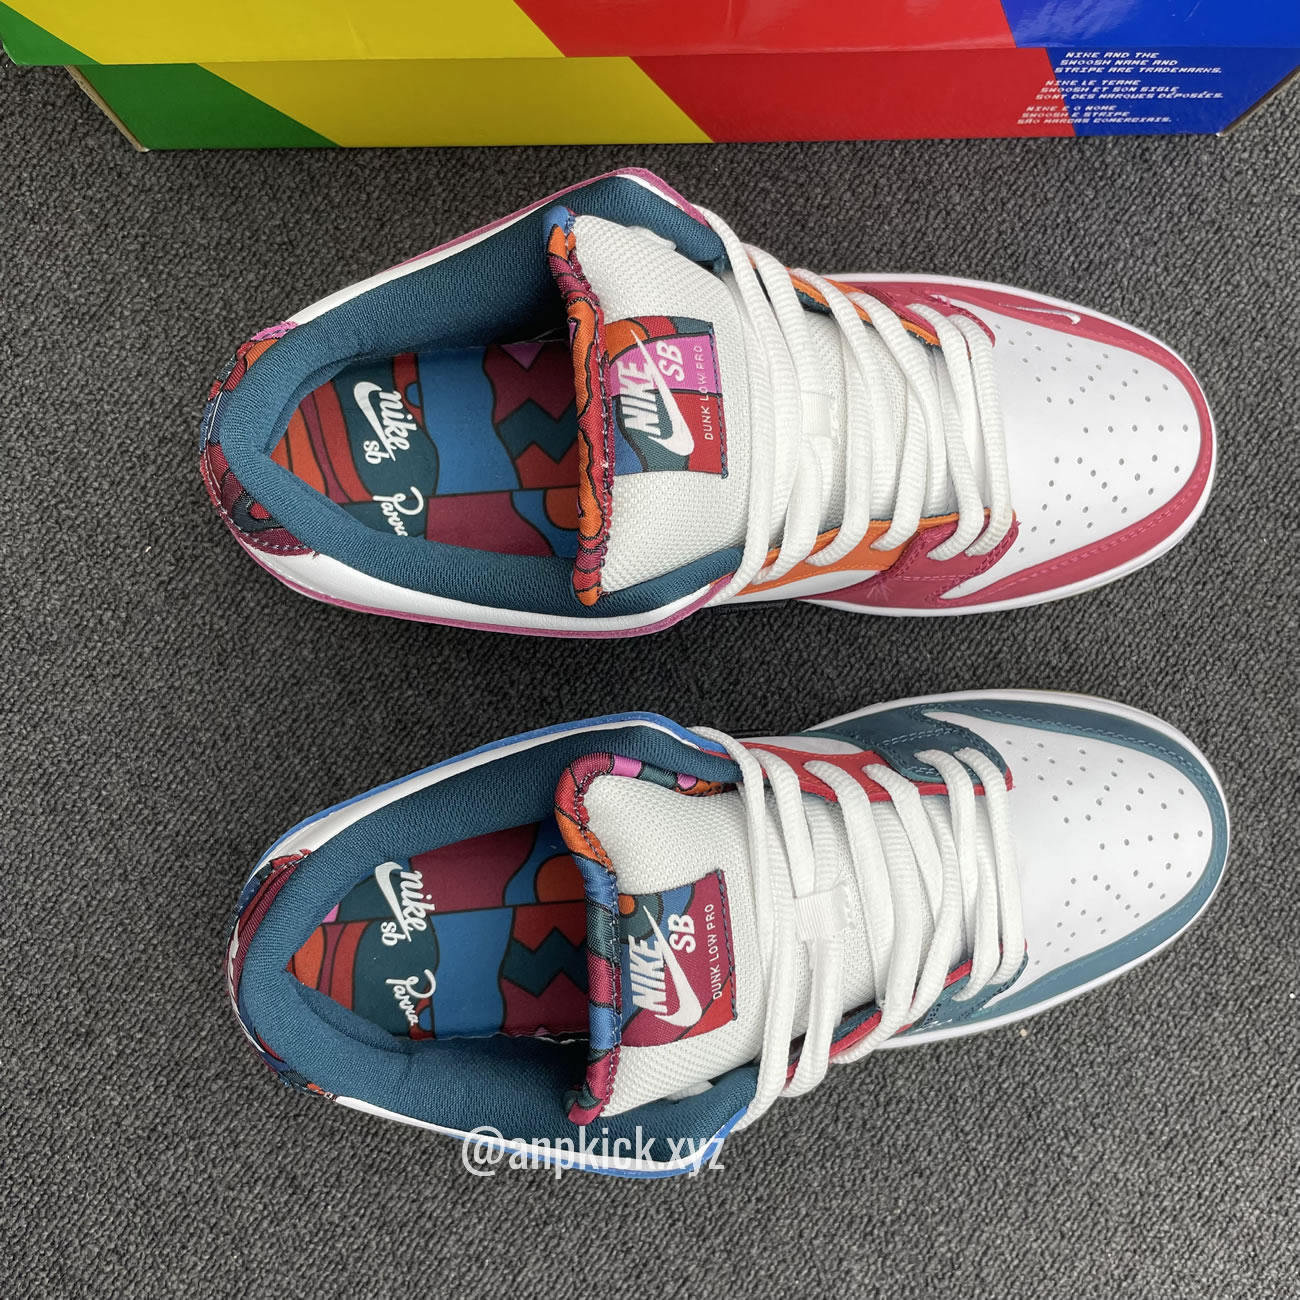 Parra Nike Sb Dunk Low Collab Summer 2021 Colorway Surfaces Dh7695 100 (9) - newkick.org